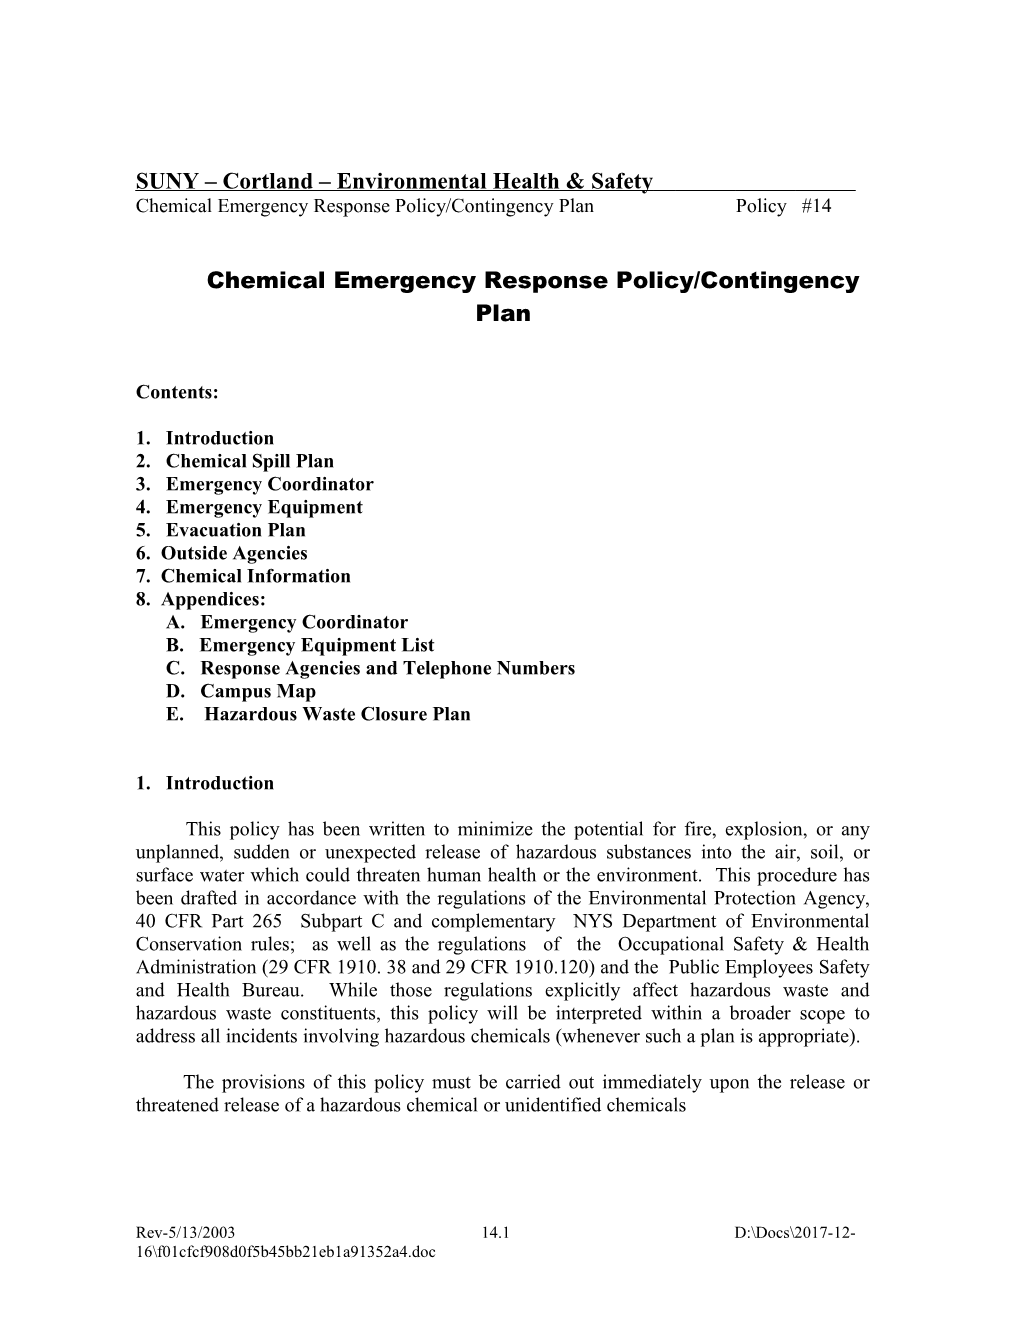 Chemical Emergency Response Policy/Contingency Plan Policy #14